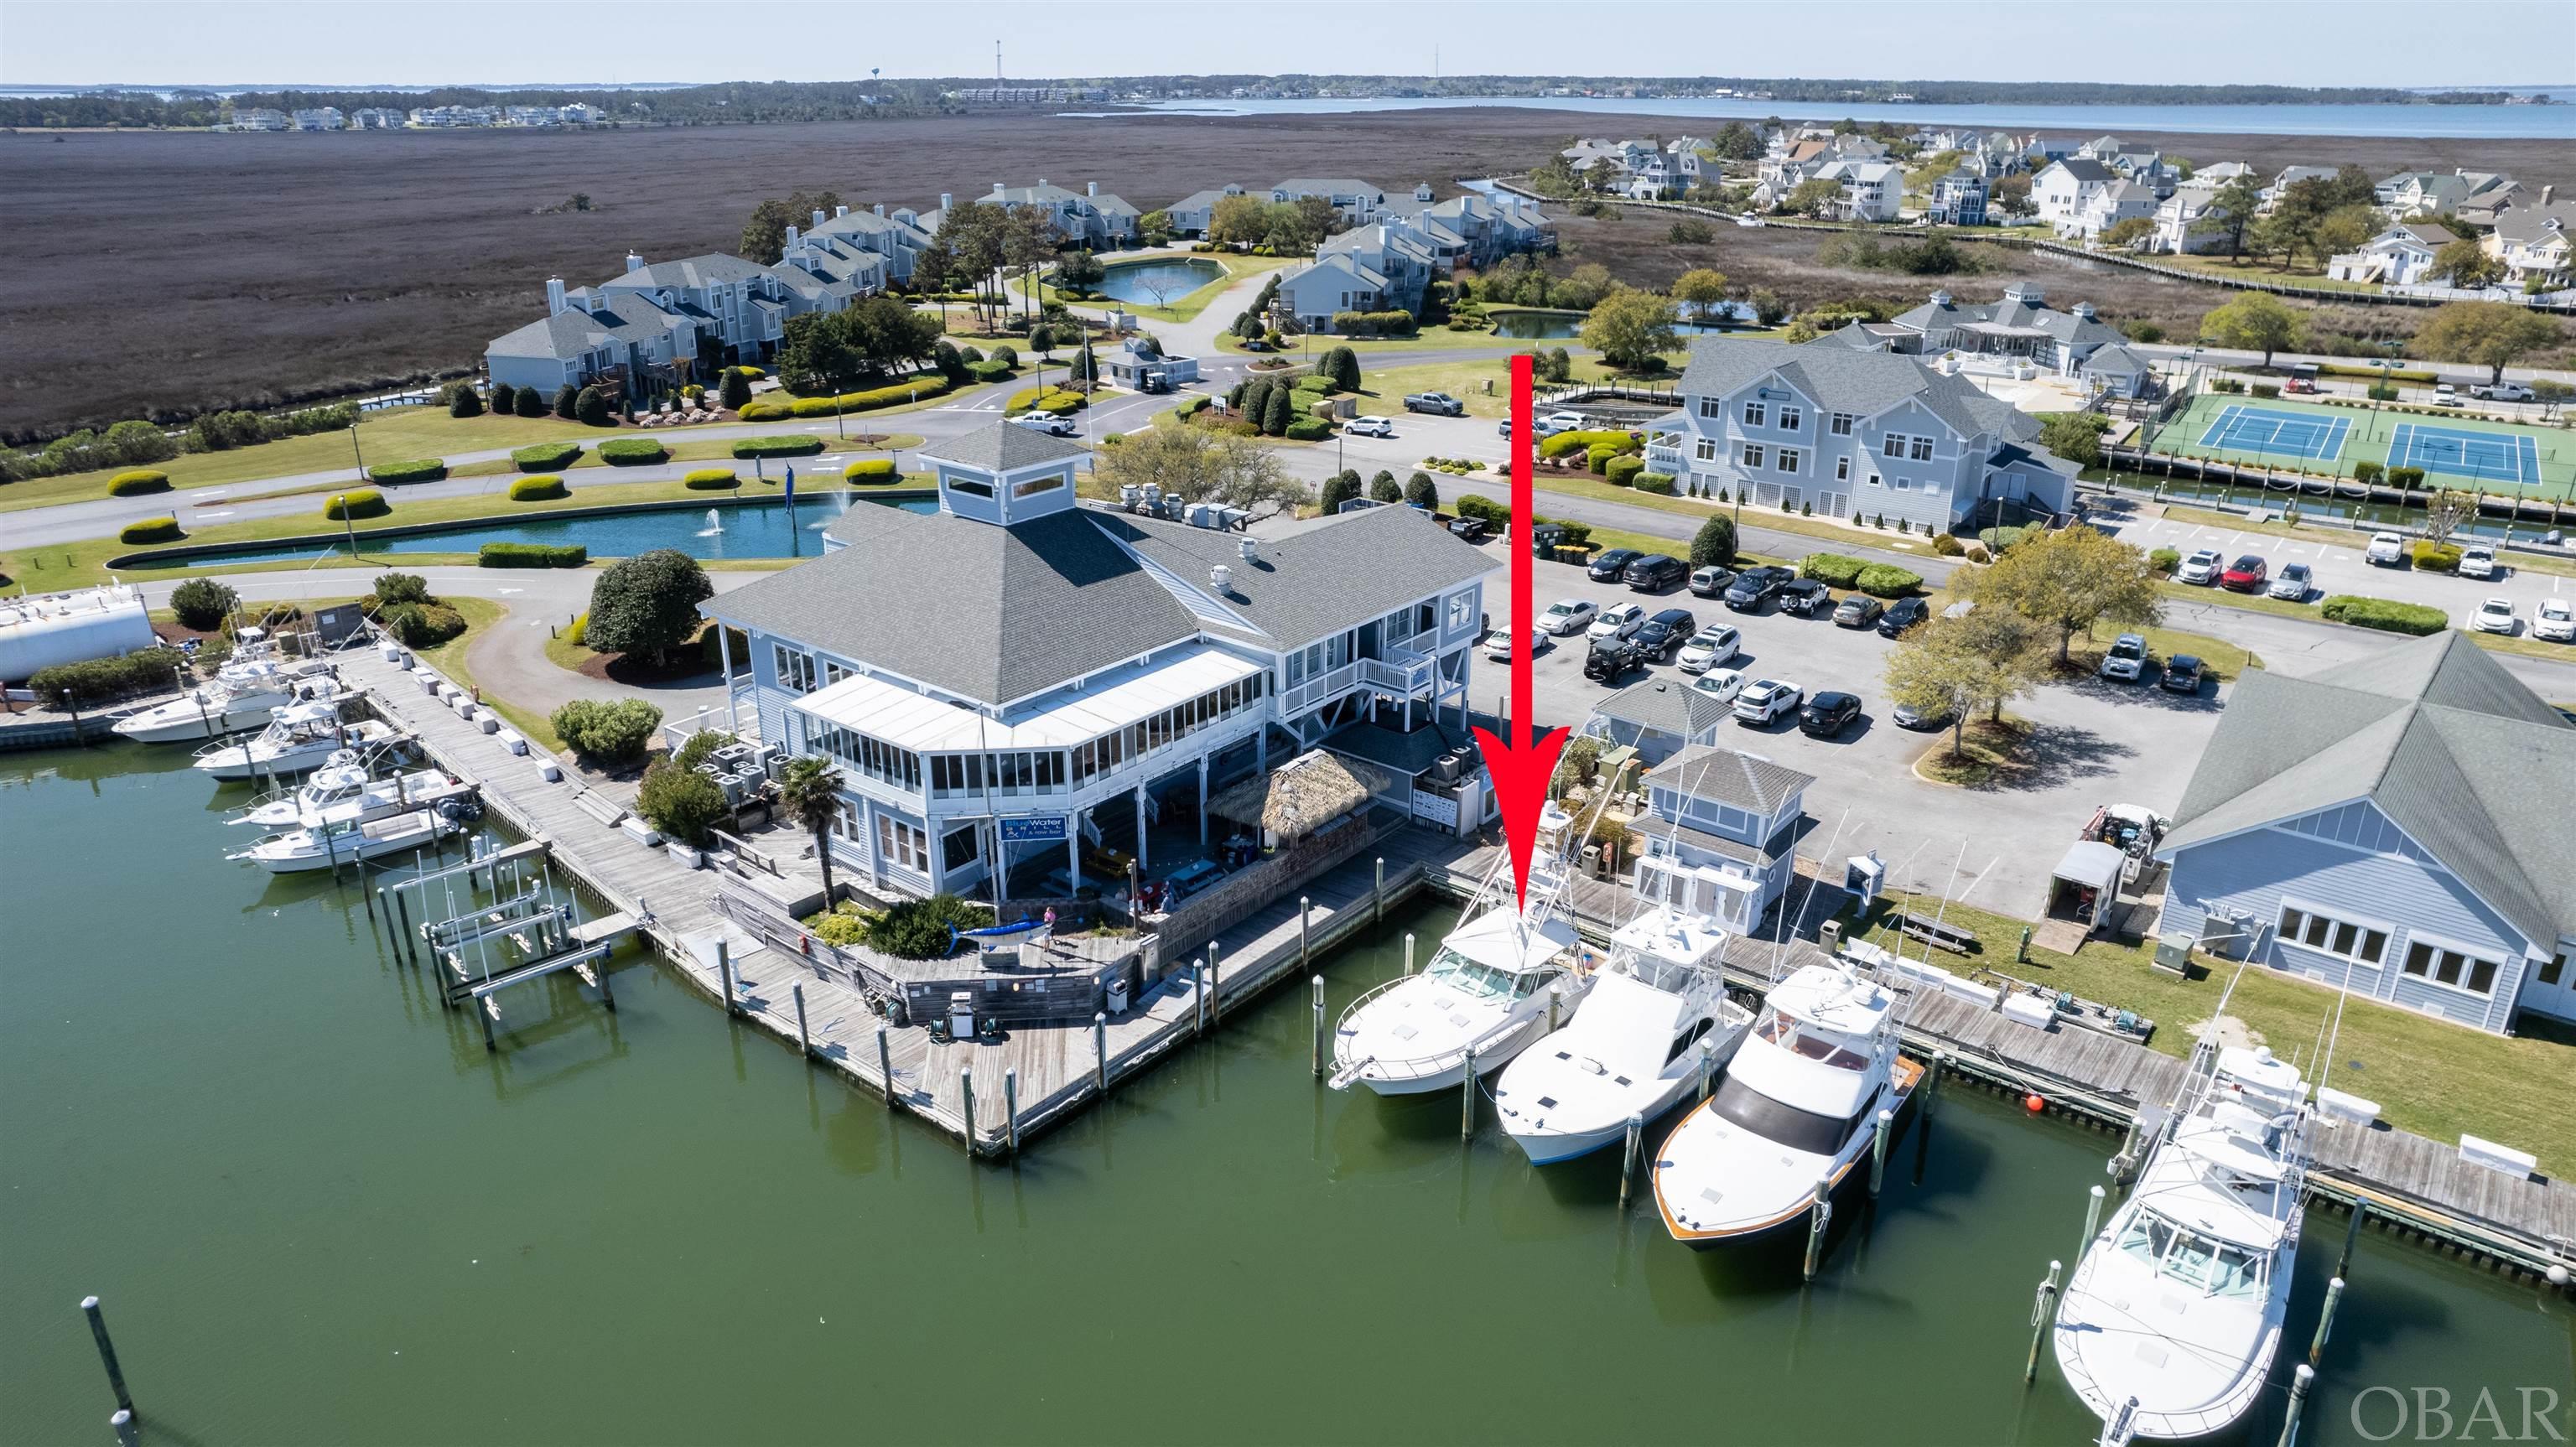 Incredible location!  Nestled on the coveted K DOCK, this 55' x 18' slip (#63) is located in the world-class Pirate's Cove Marina and only steps to on-site facilities.  Pirate's Cove Marina is a protected, deep water, full-service marina with 195 slips and a charter fleet of sport fish boats for offshore, nearshore and inlet fishing.  One of the largest world-class marinas on the East Coast, Pirate's Cove offers a fuel dock for non-ethanol gas and diesel, slips with in-slip fueling, private fish cleaning houses, showers, Ship's Store for light provisioning, an on-site full-service restaurant and Tiki Bar, and annual fishing tournaments.  This slip is located in the thicket of tournament activity and neighborhood amenities are available for a minimal daily fee.  Buyer to verify slip measurements.